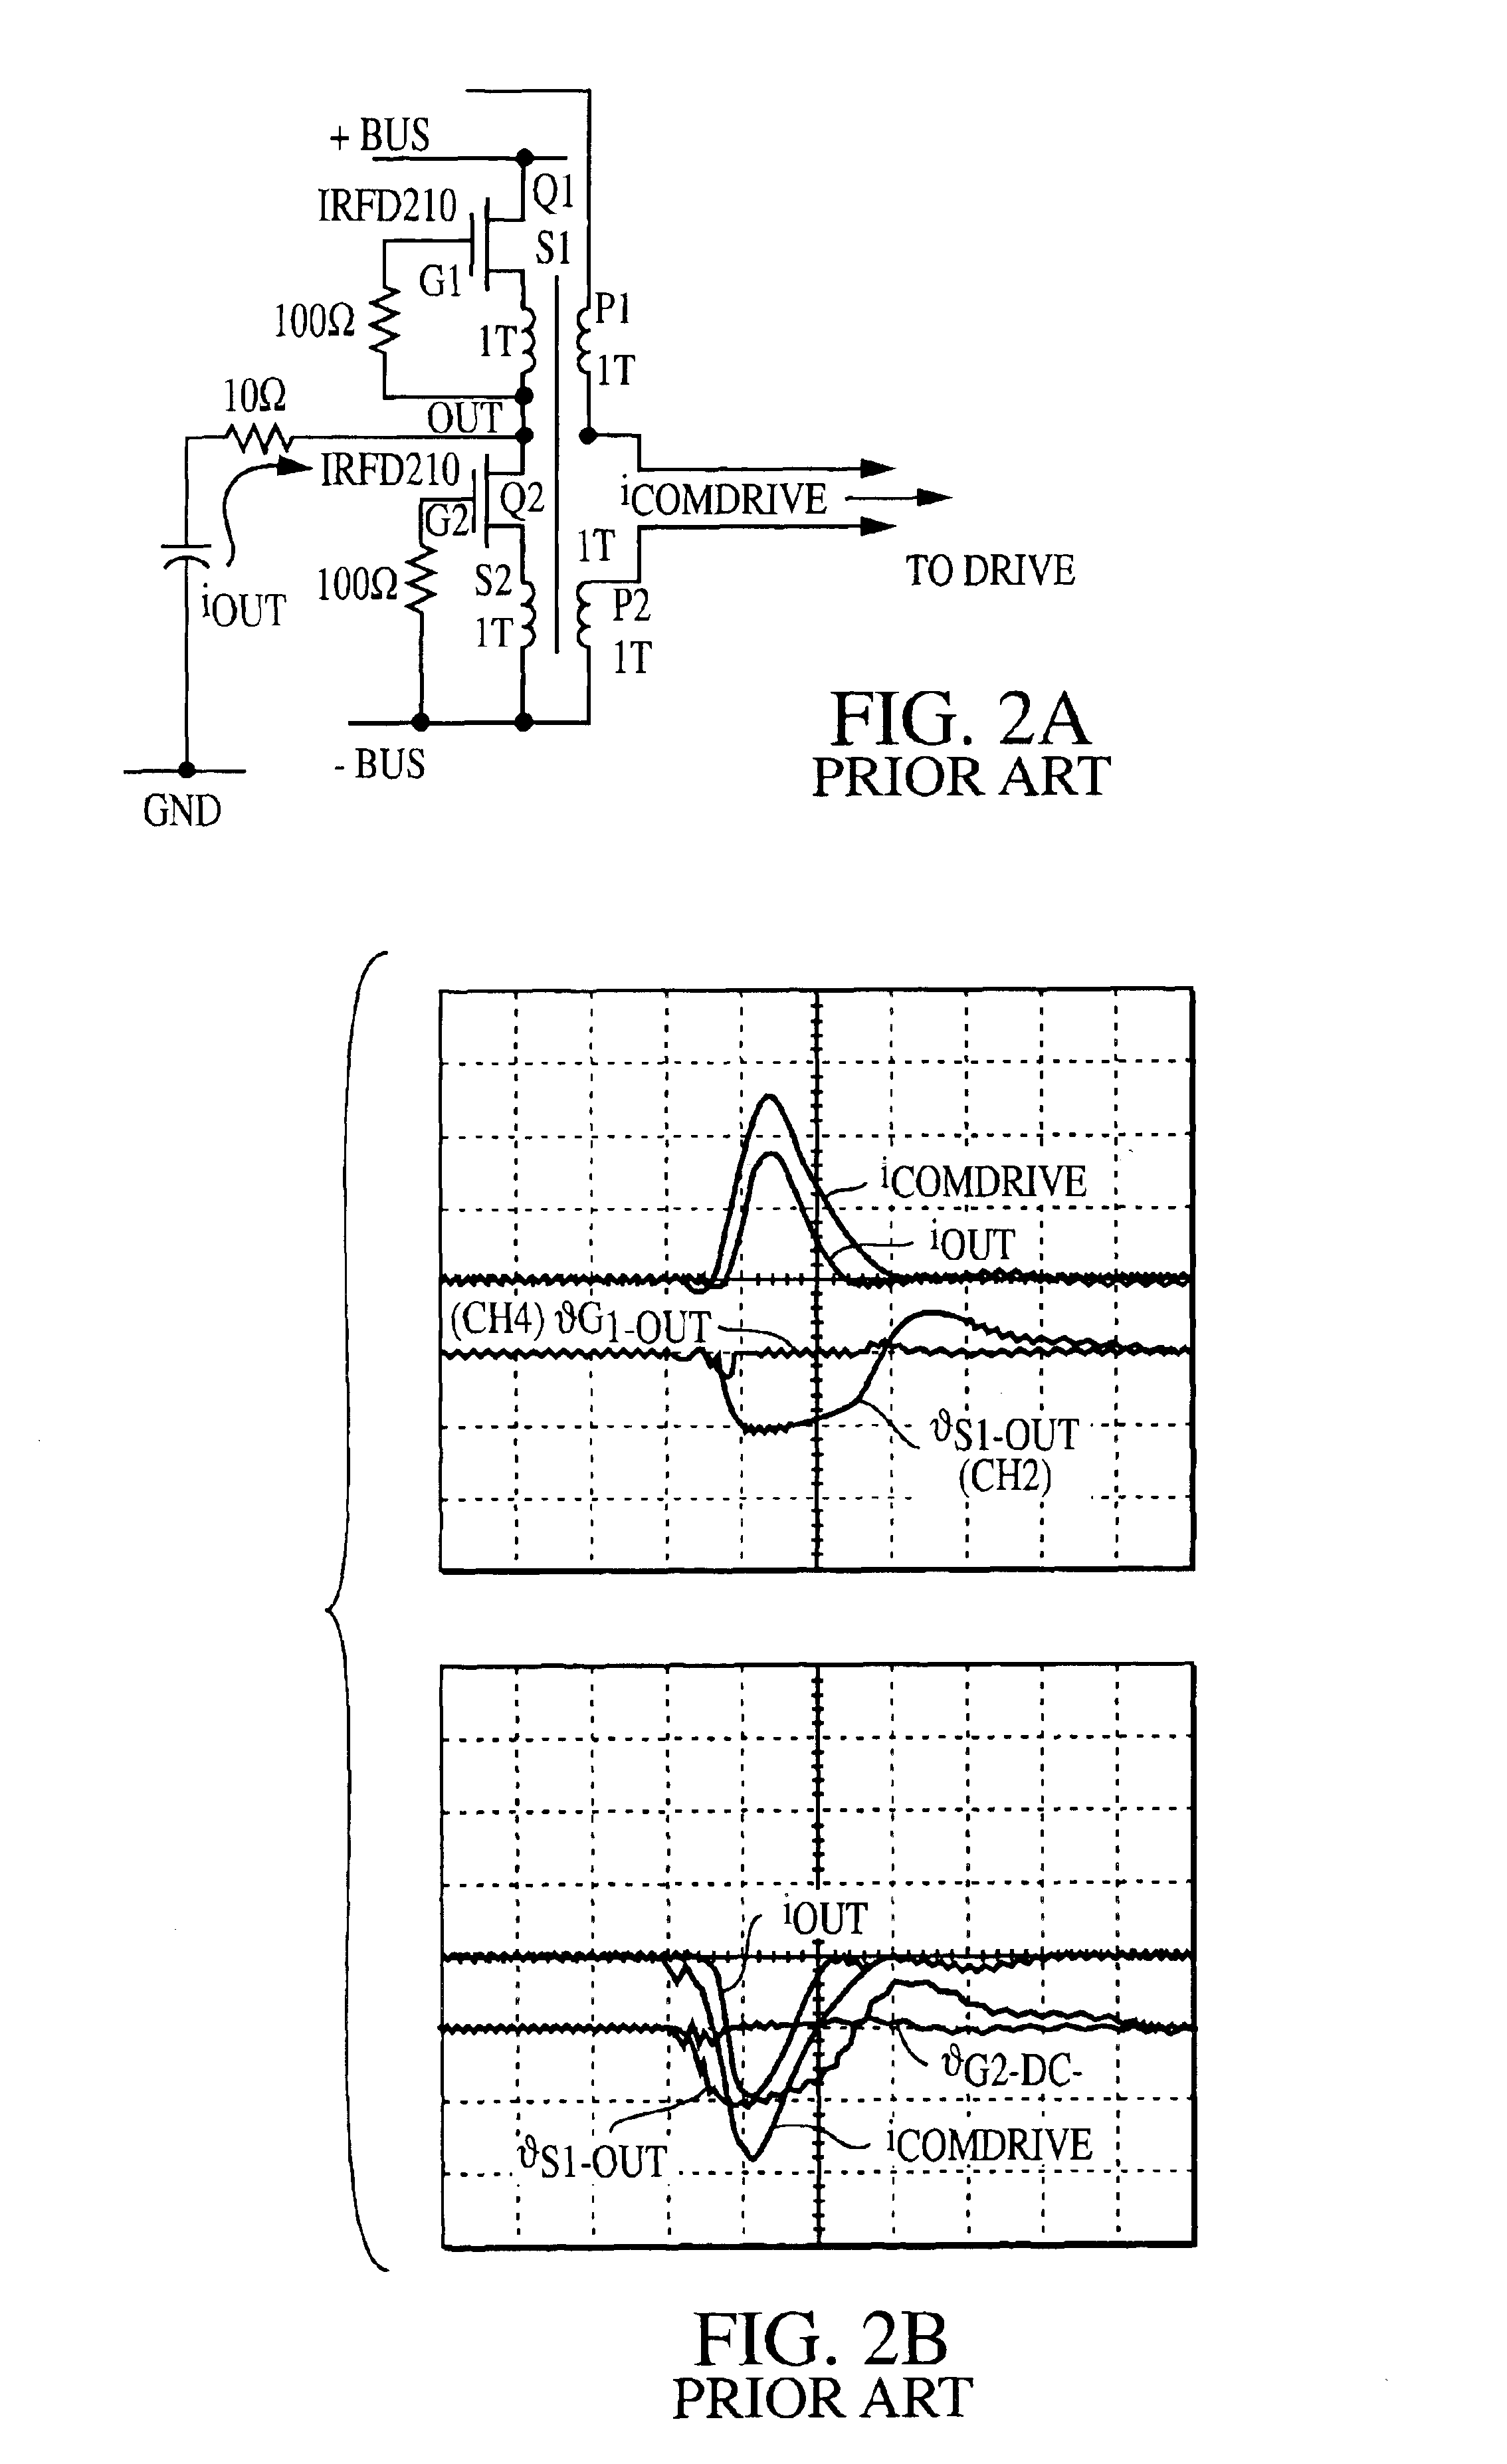 Active common mode EMI filters